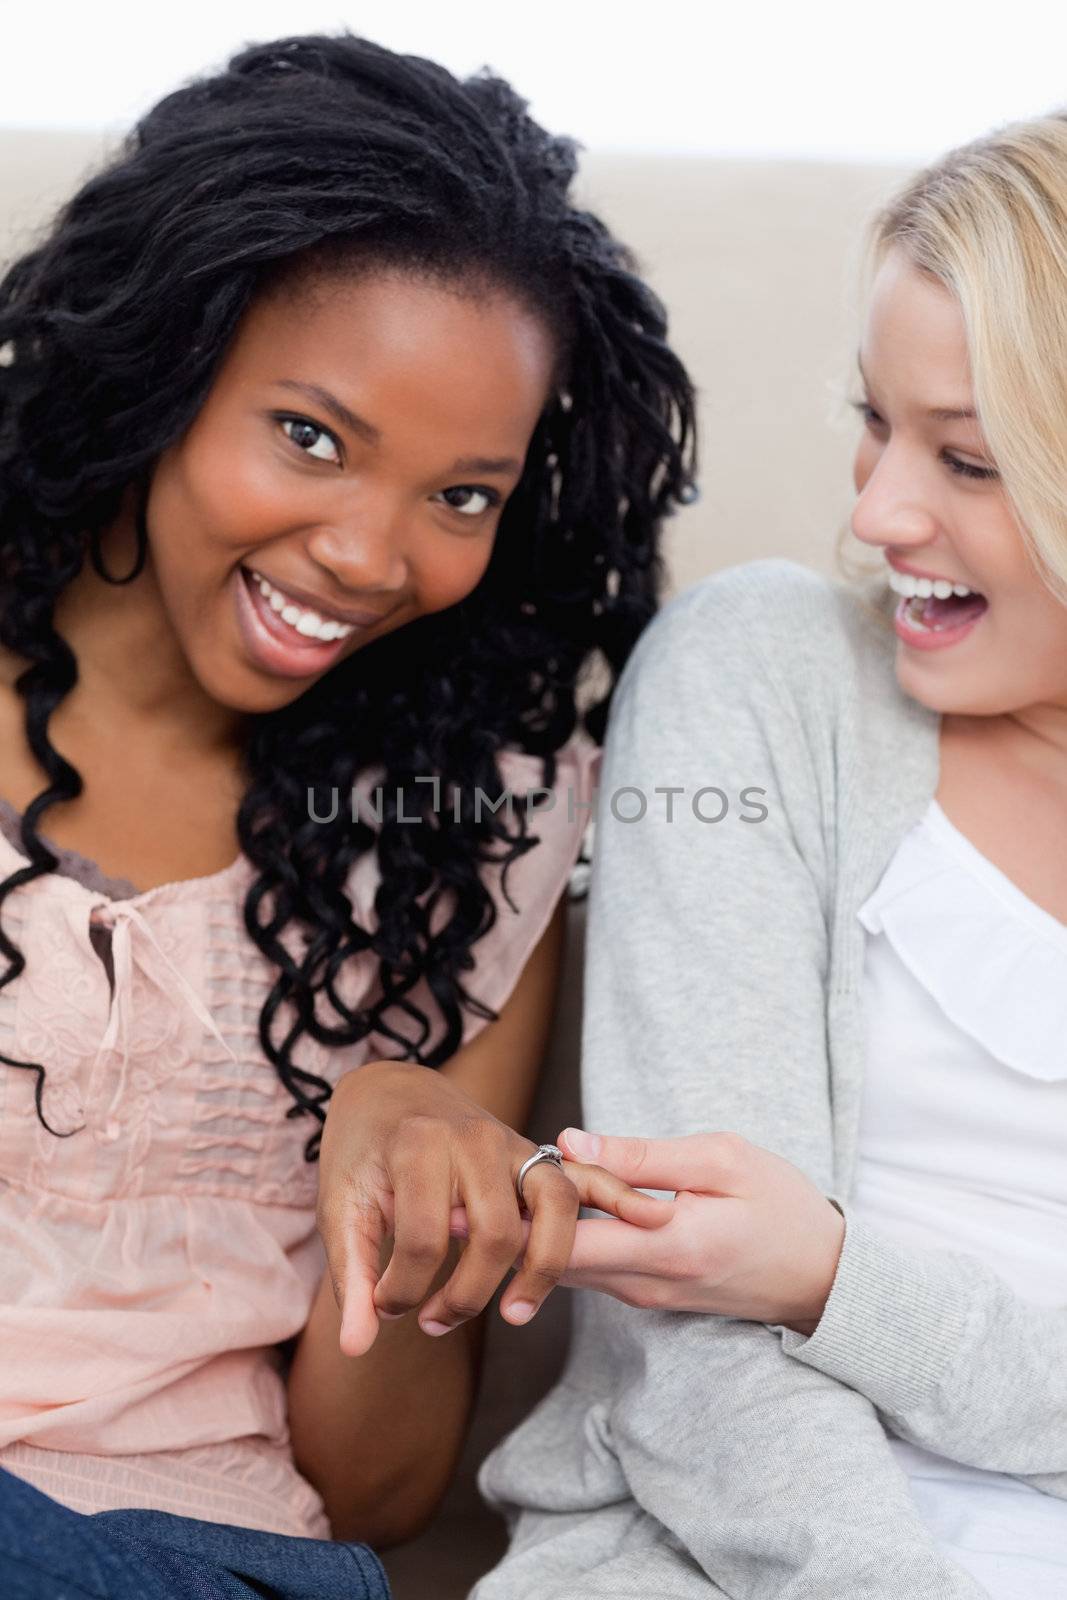 A woman  smiling at the camera is showing her friend her wedding by Wavebreakmedia